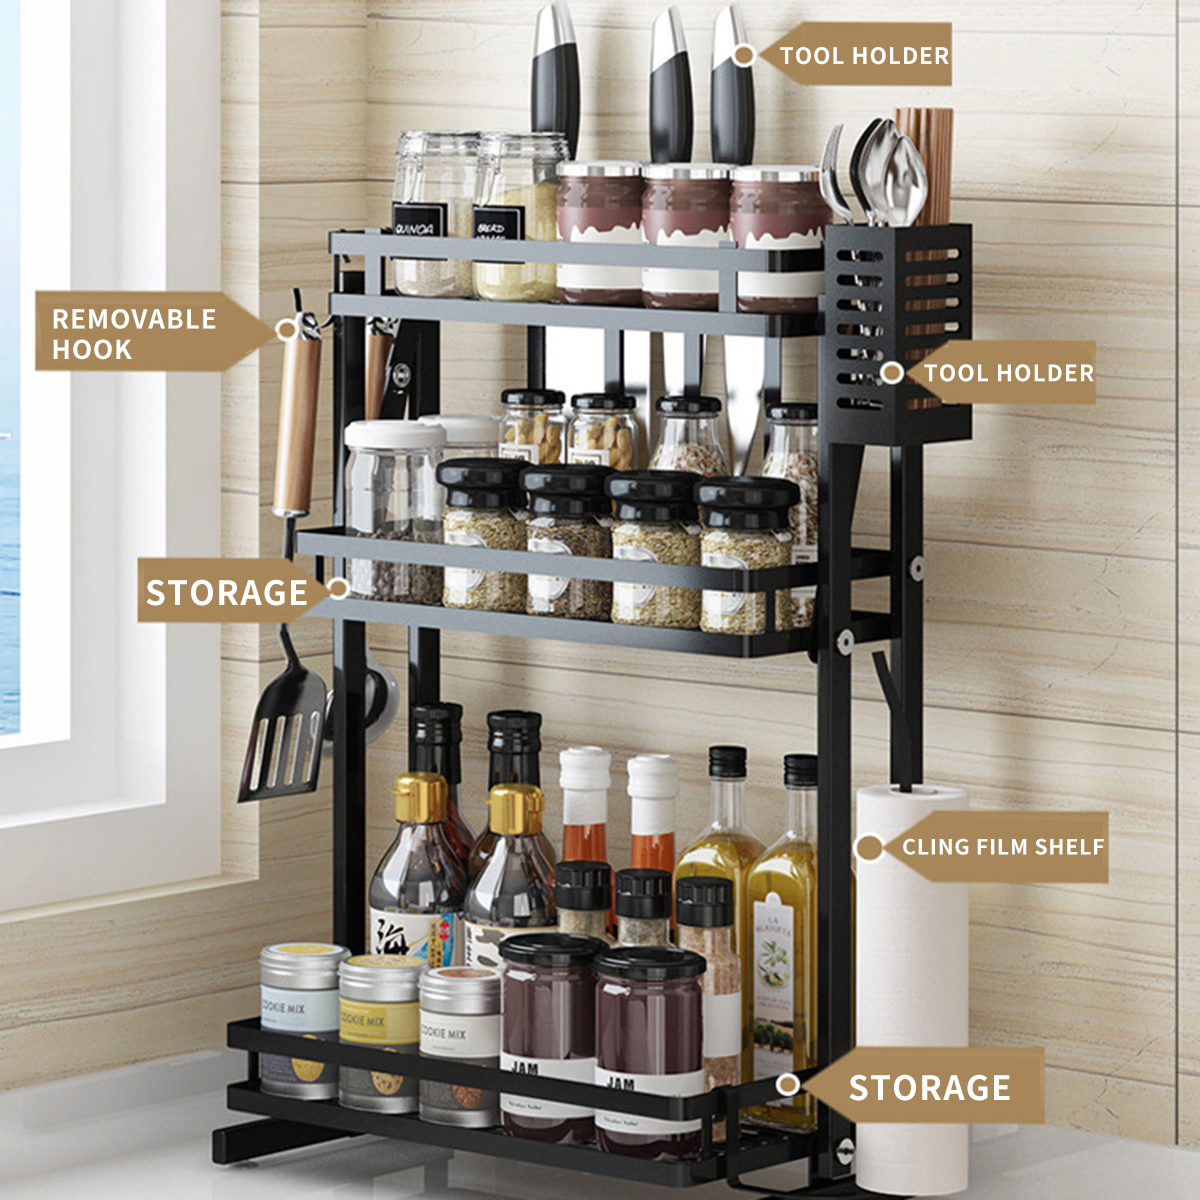 Spice-Rack-Kitchen-Counter-Organizer-with-4-Suction-Pads-Large-Capacity-for-Essential-Oils-Steady-Ba-1807821-4